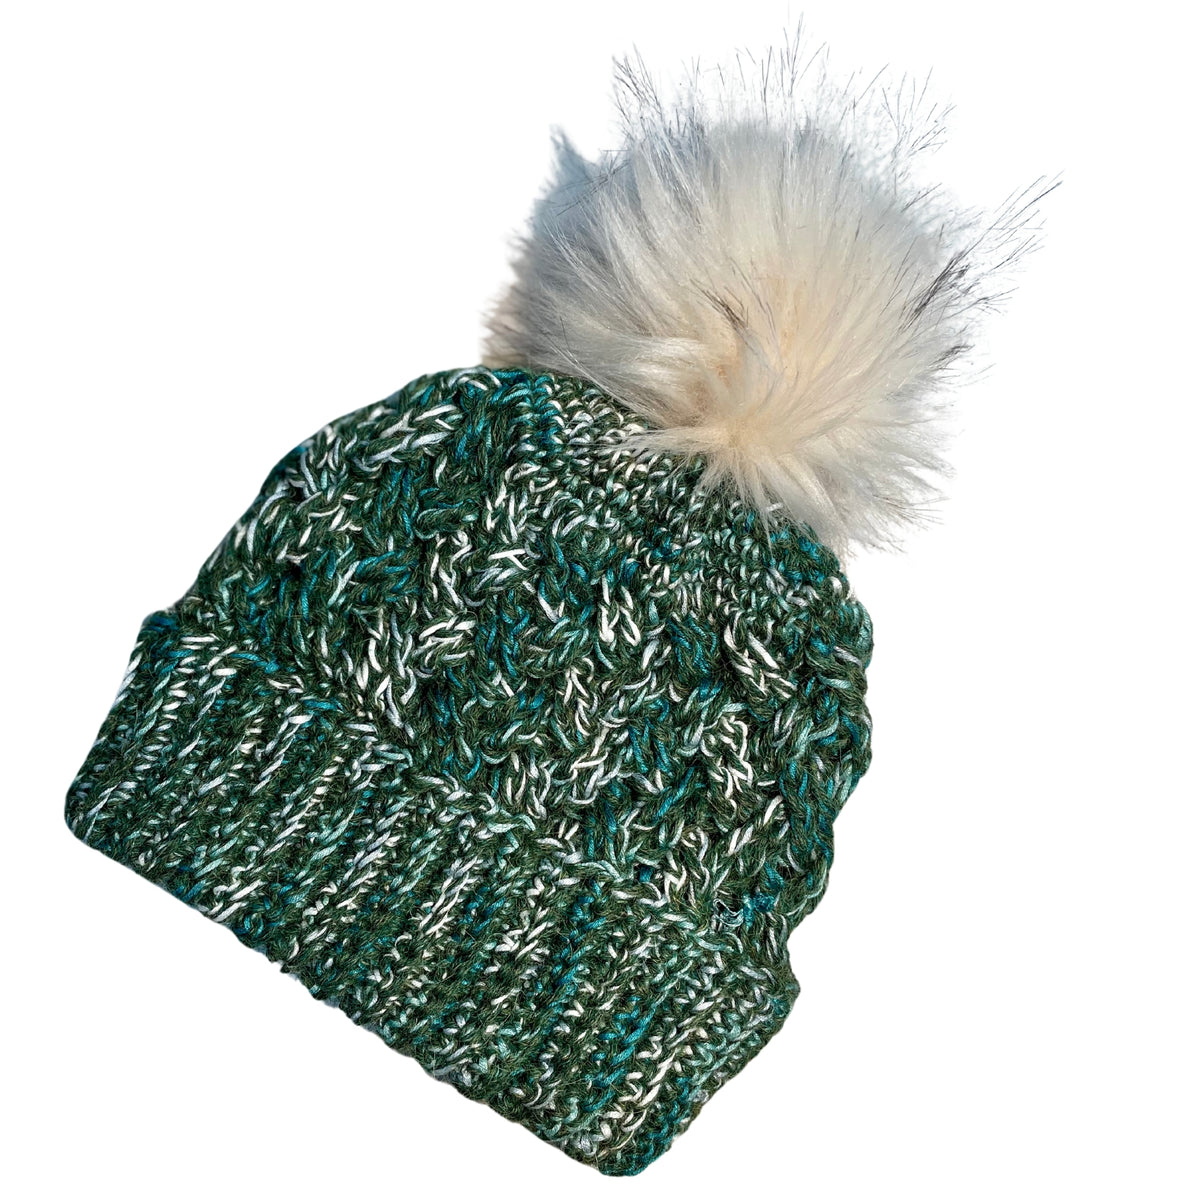 Moss green, teal, turquoise, seafoam, and white colored cozy soft warm handmade knitted crochet celtic hat with a white pom pom made in Montana by Alpacas of Montana.